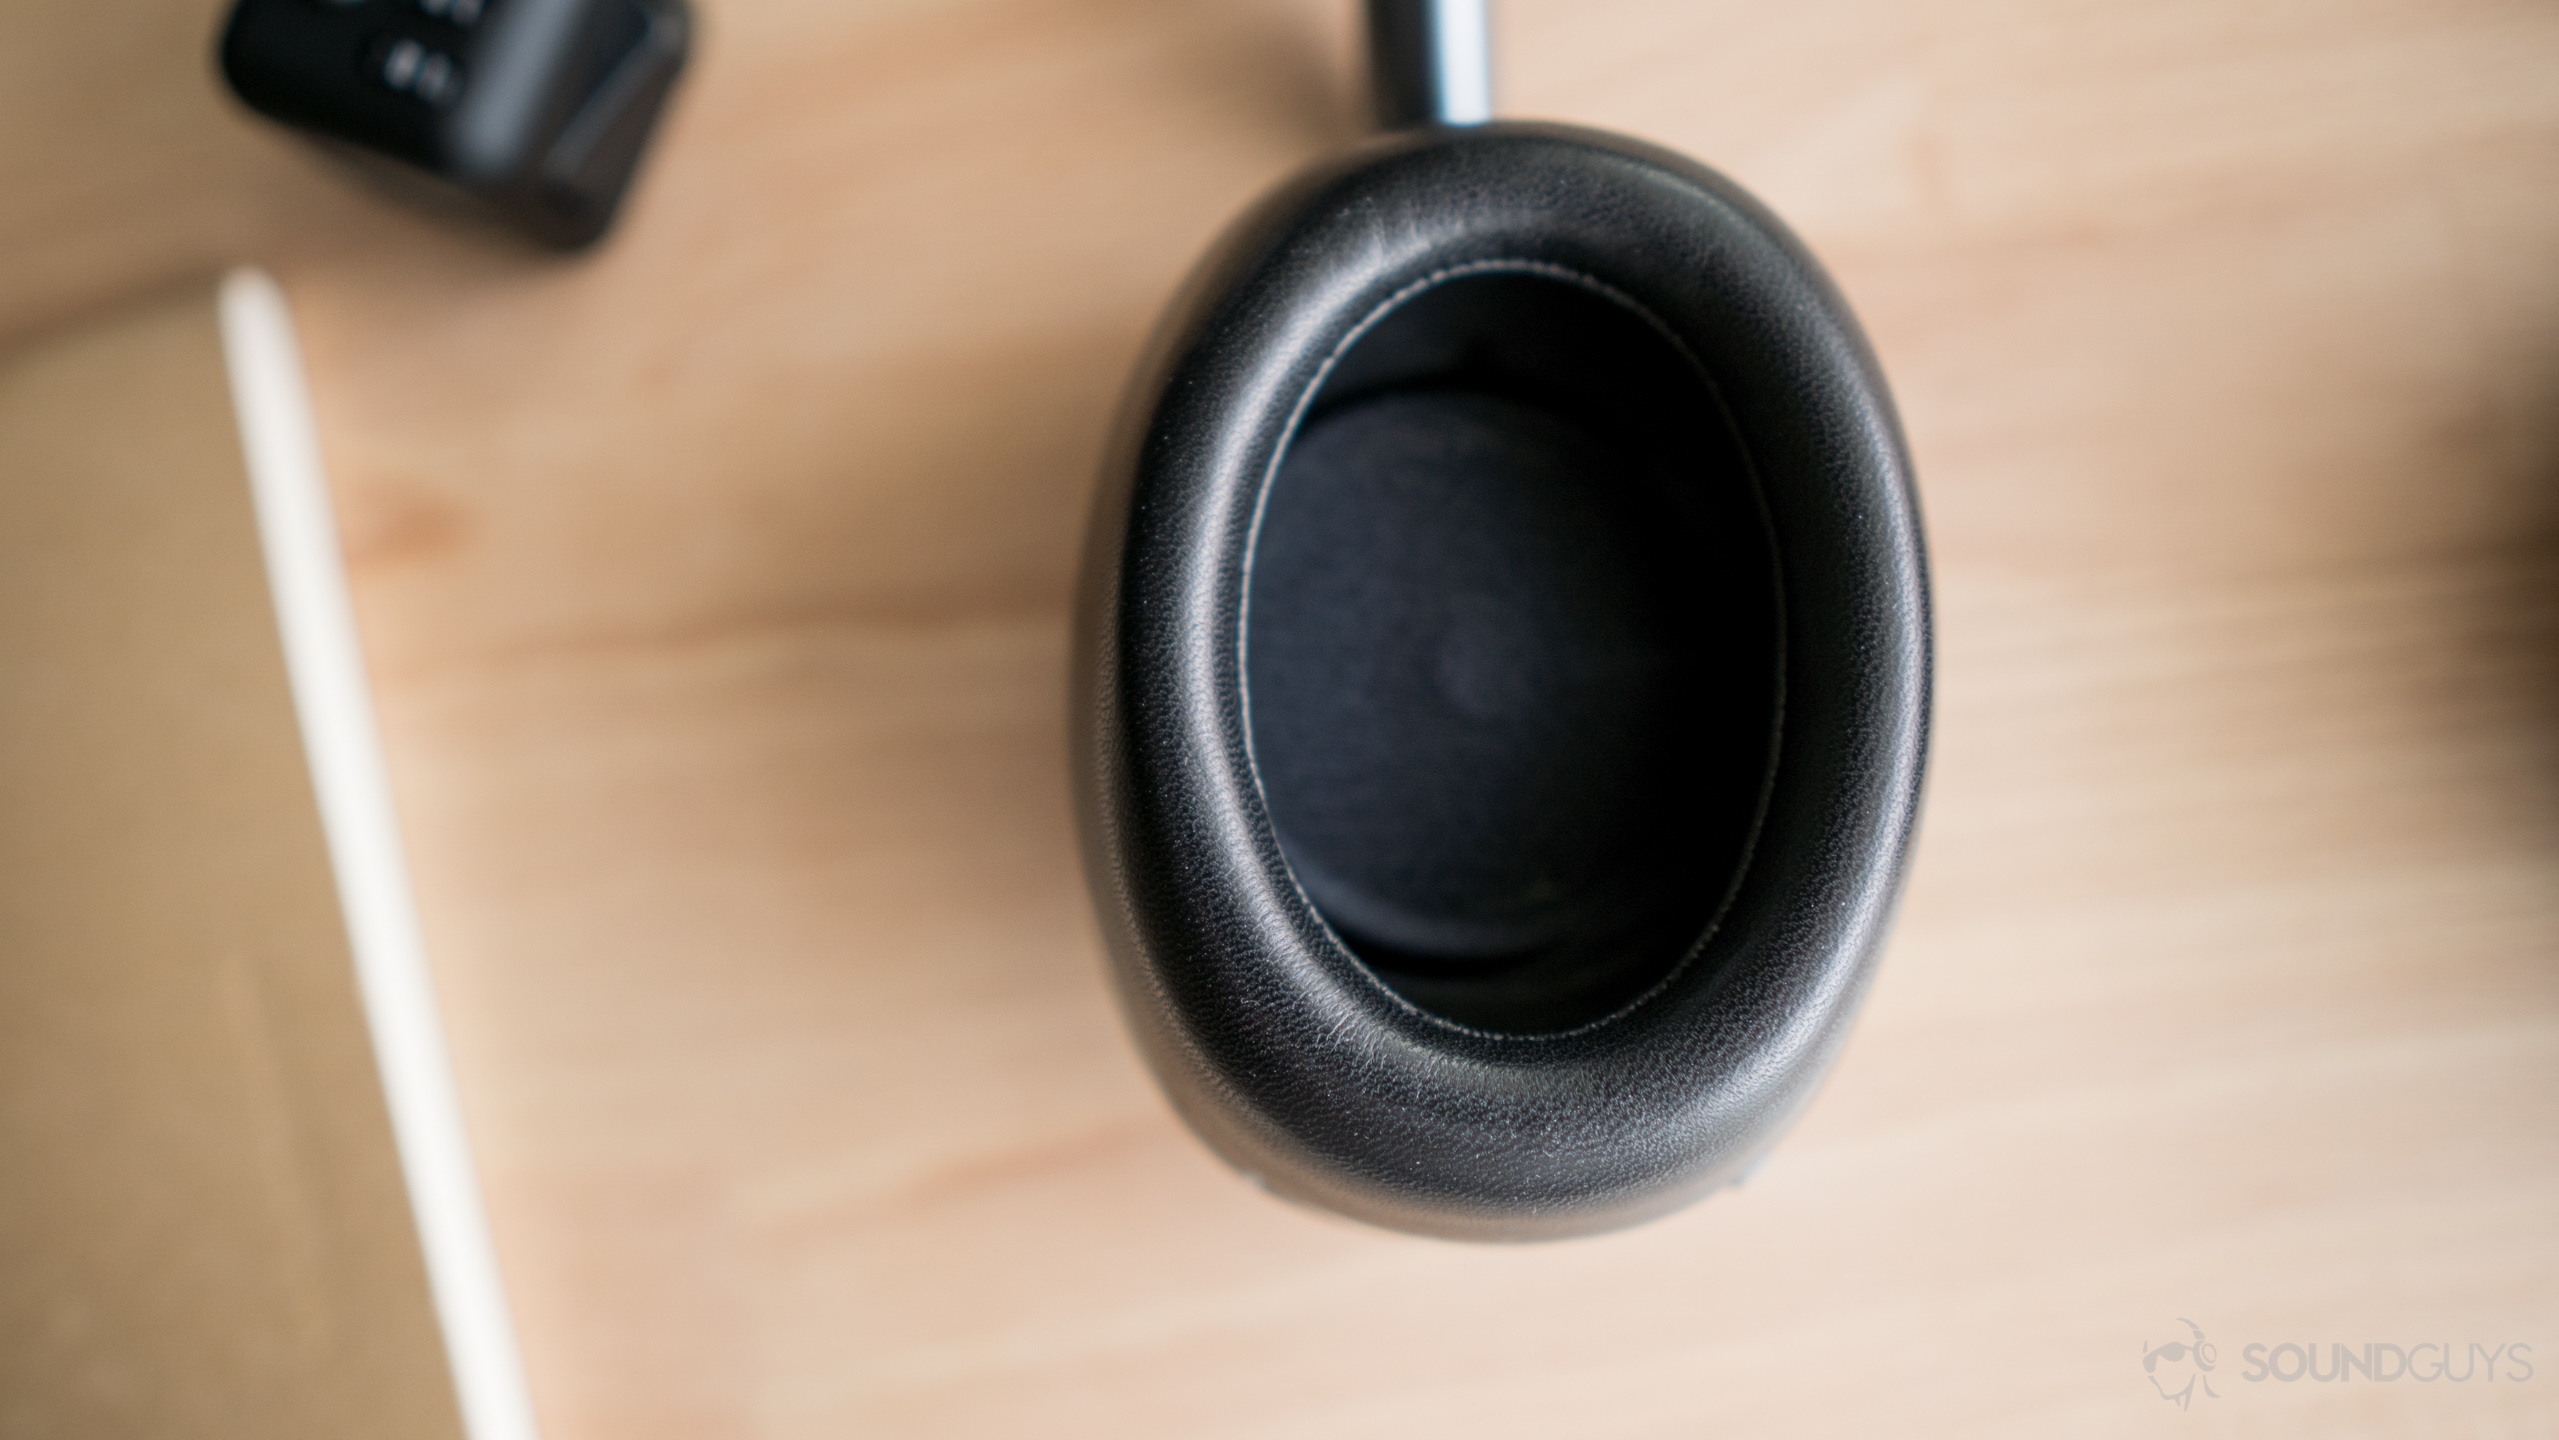 The drivers are deep in the ear cup, leaving plenty of space for your ears.